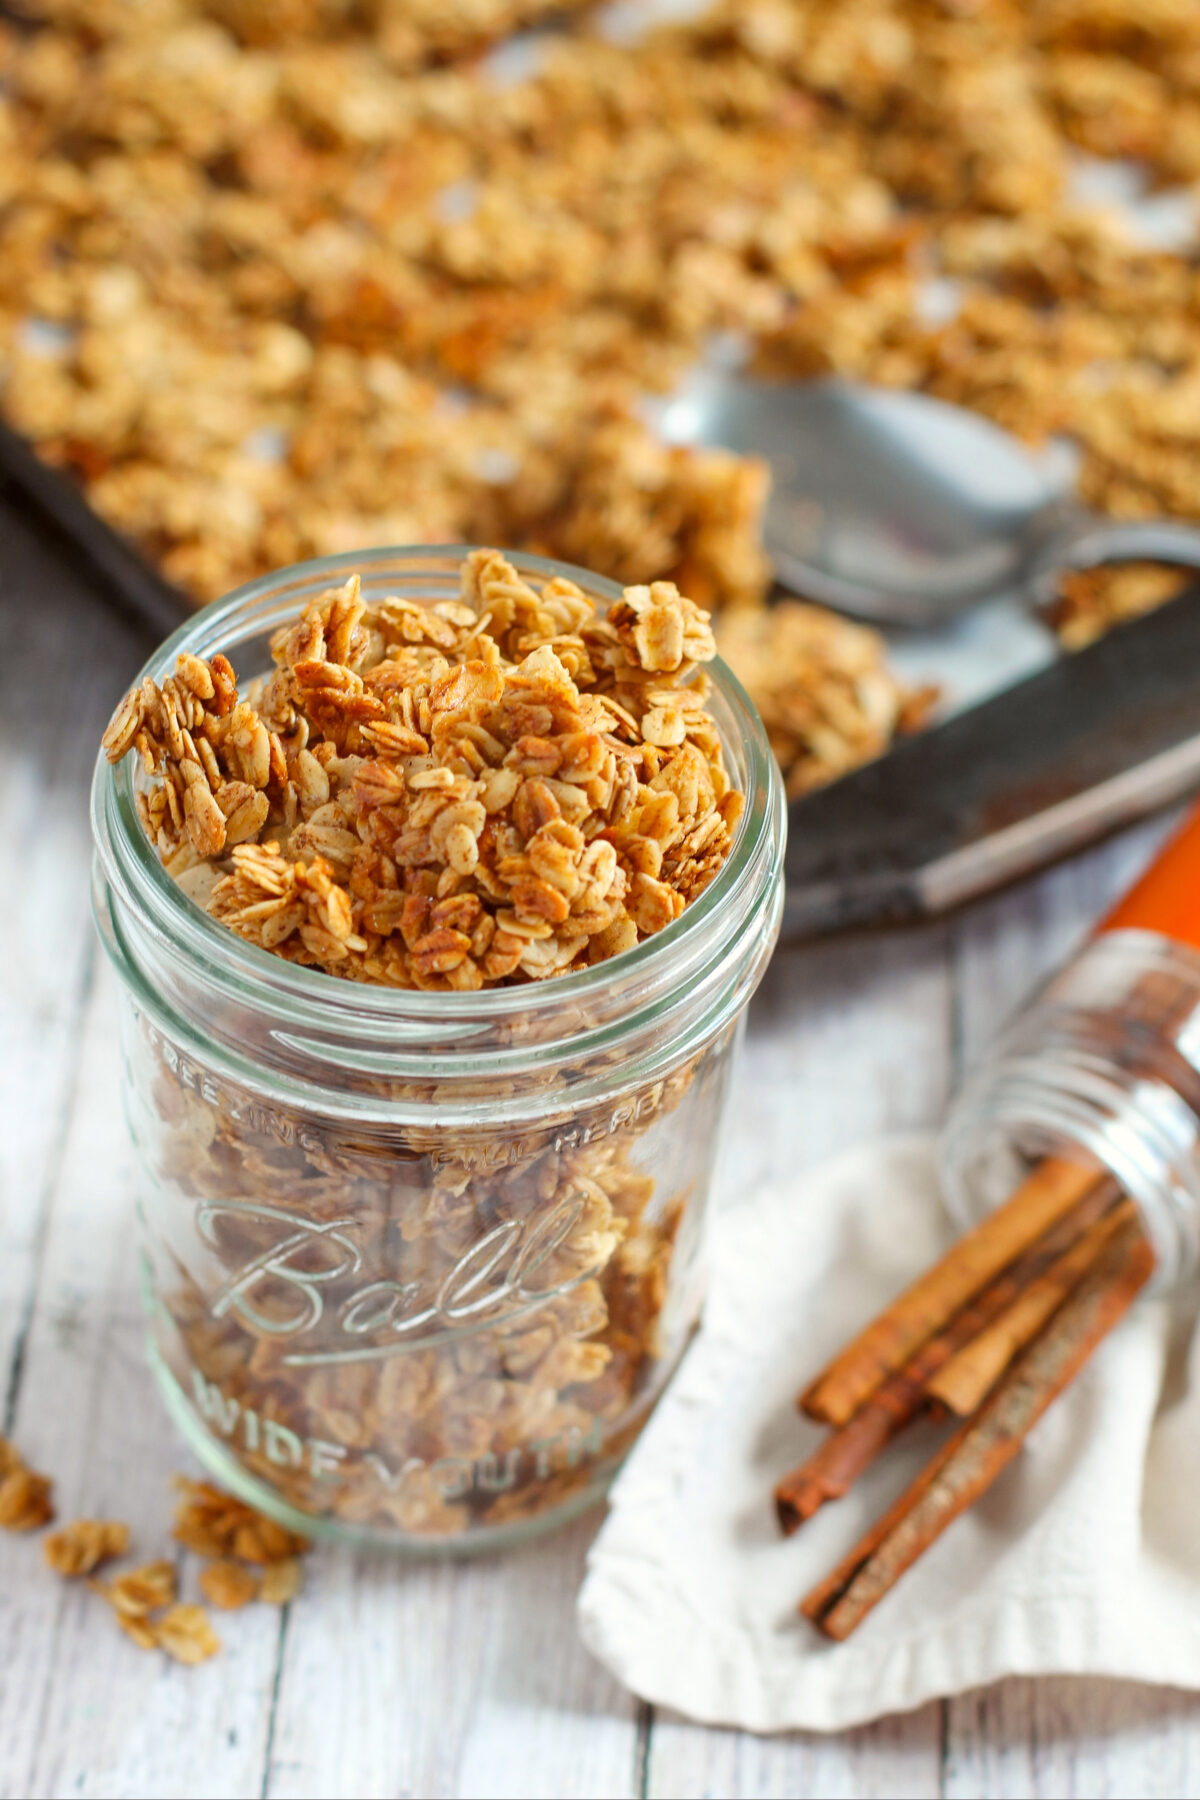 Check out this fun and festive homemade gingerbread granola recipe that is perfect for holiday breakfasts and snacking!